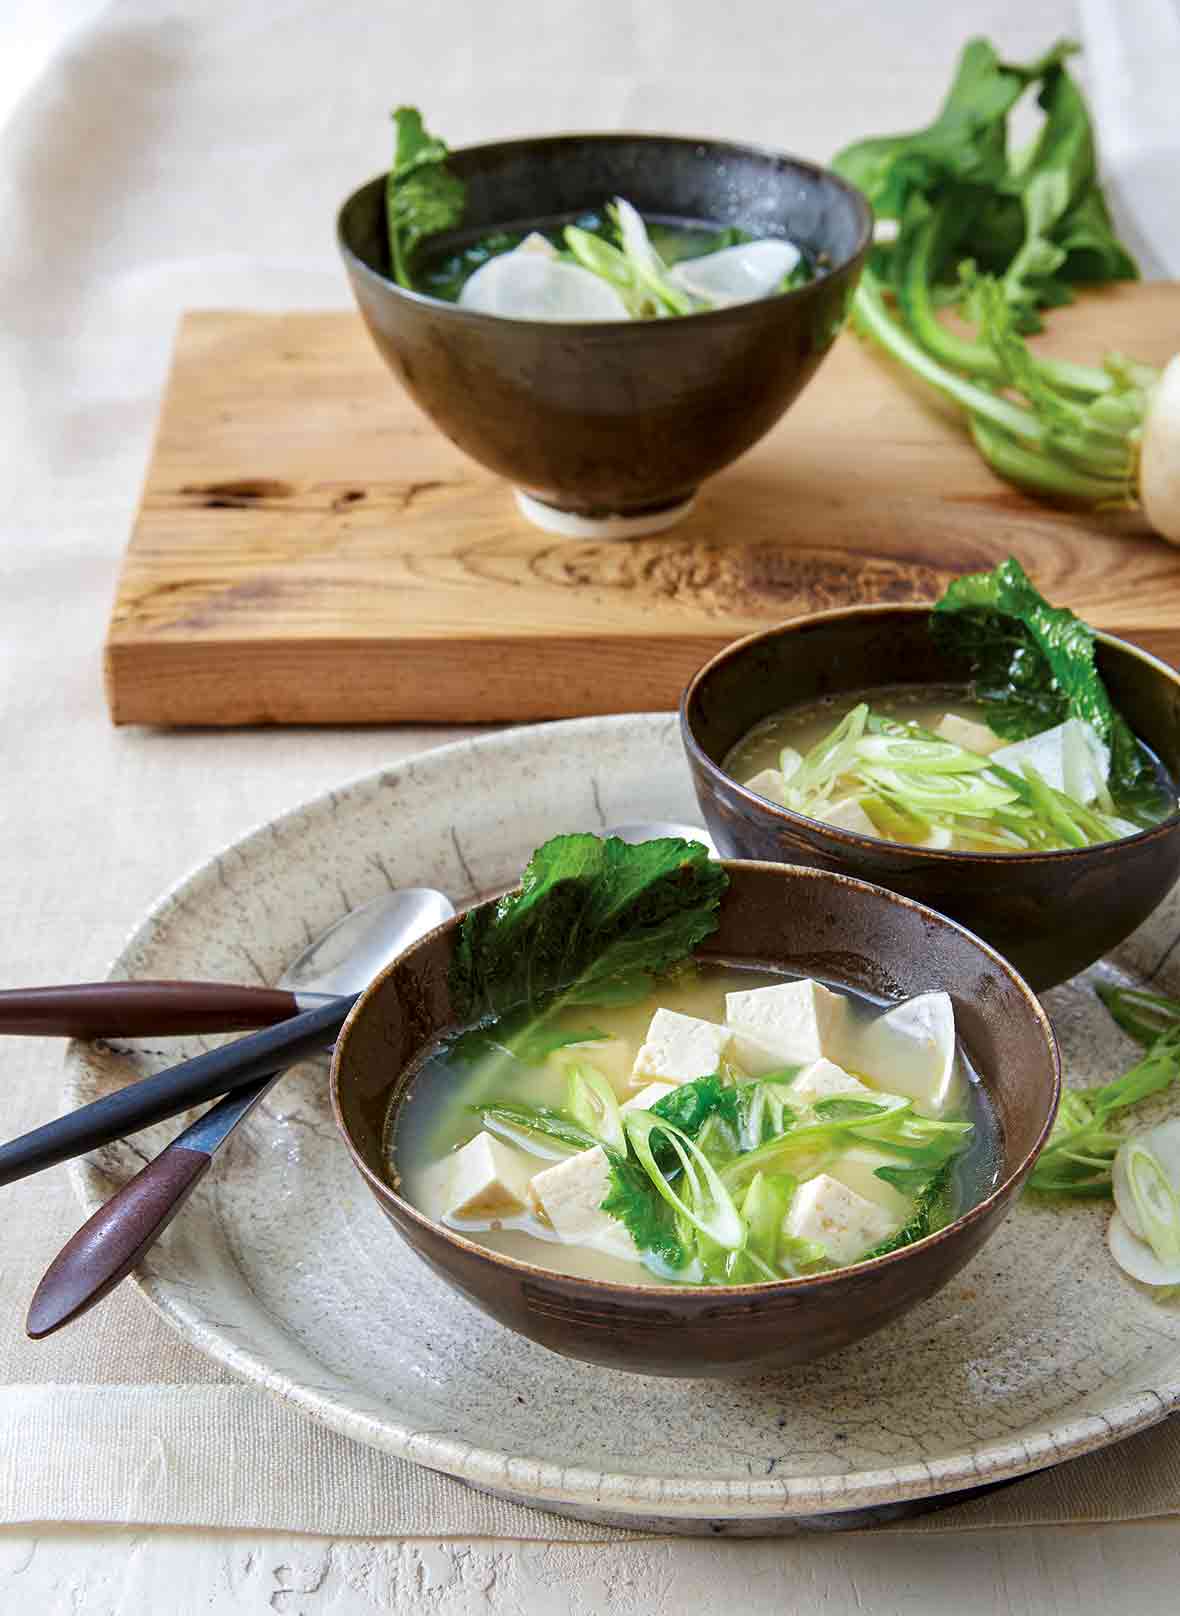 Two bowls of ginger miso soup with tofu, turnip greens, and miso broth